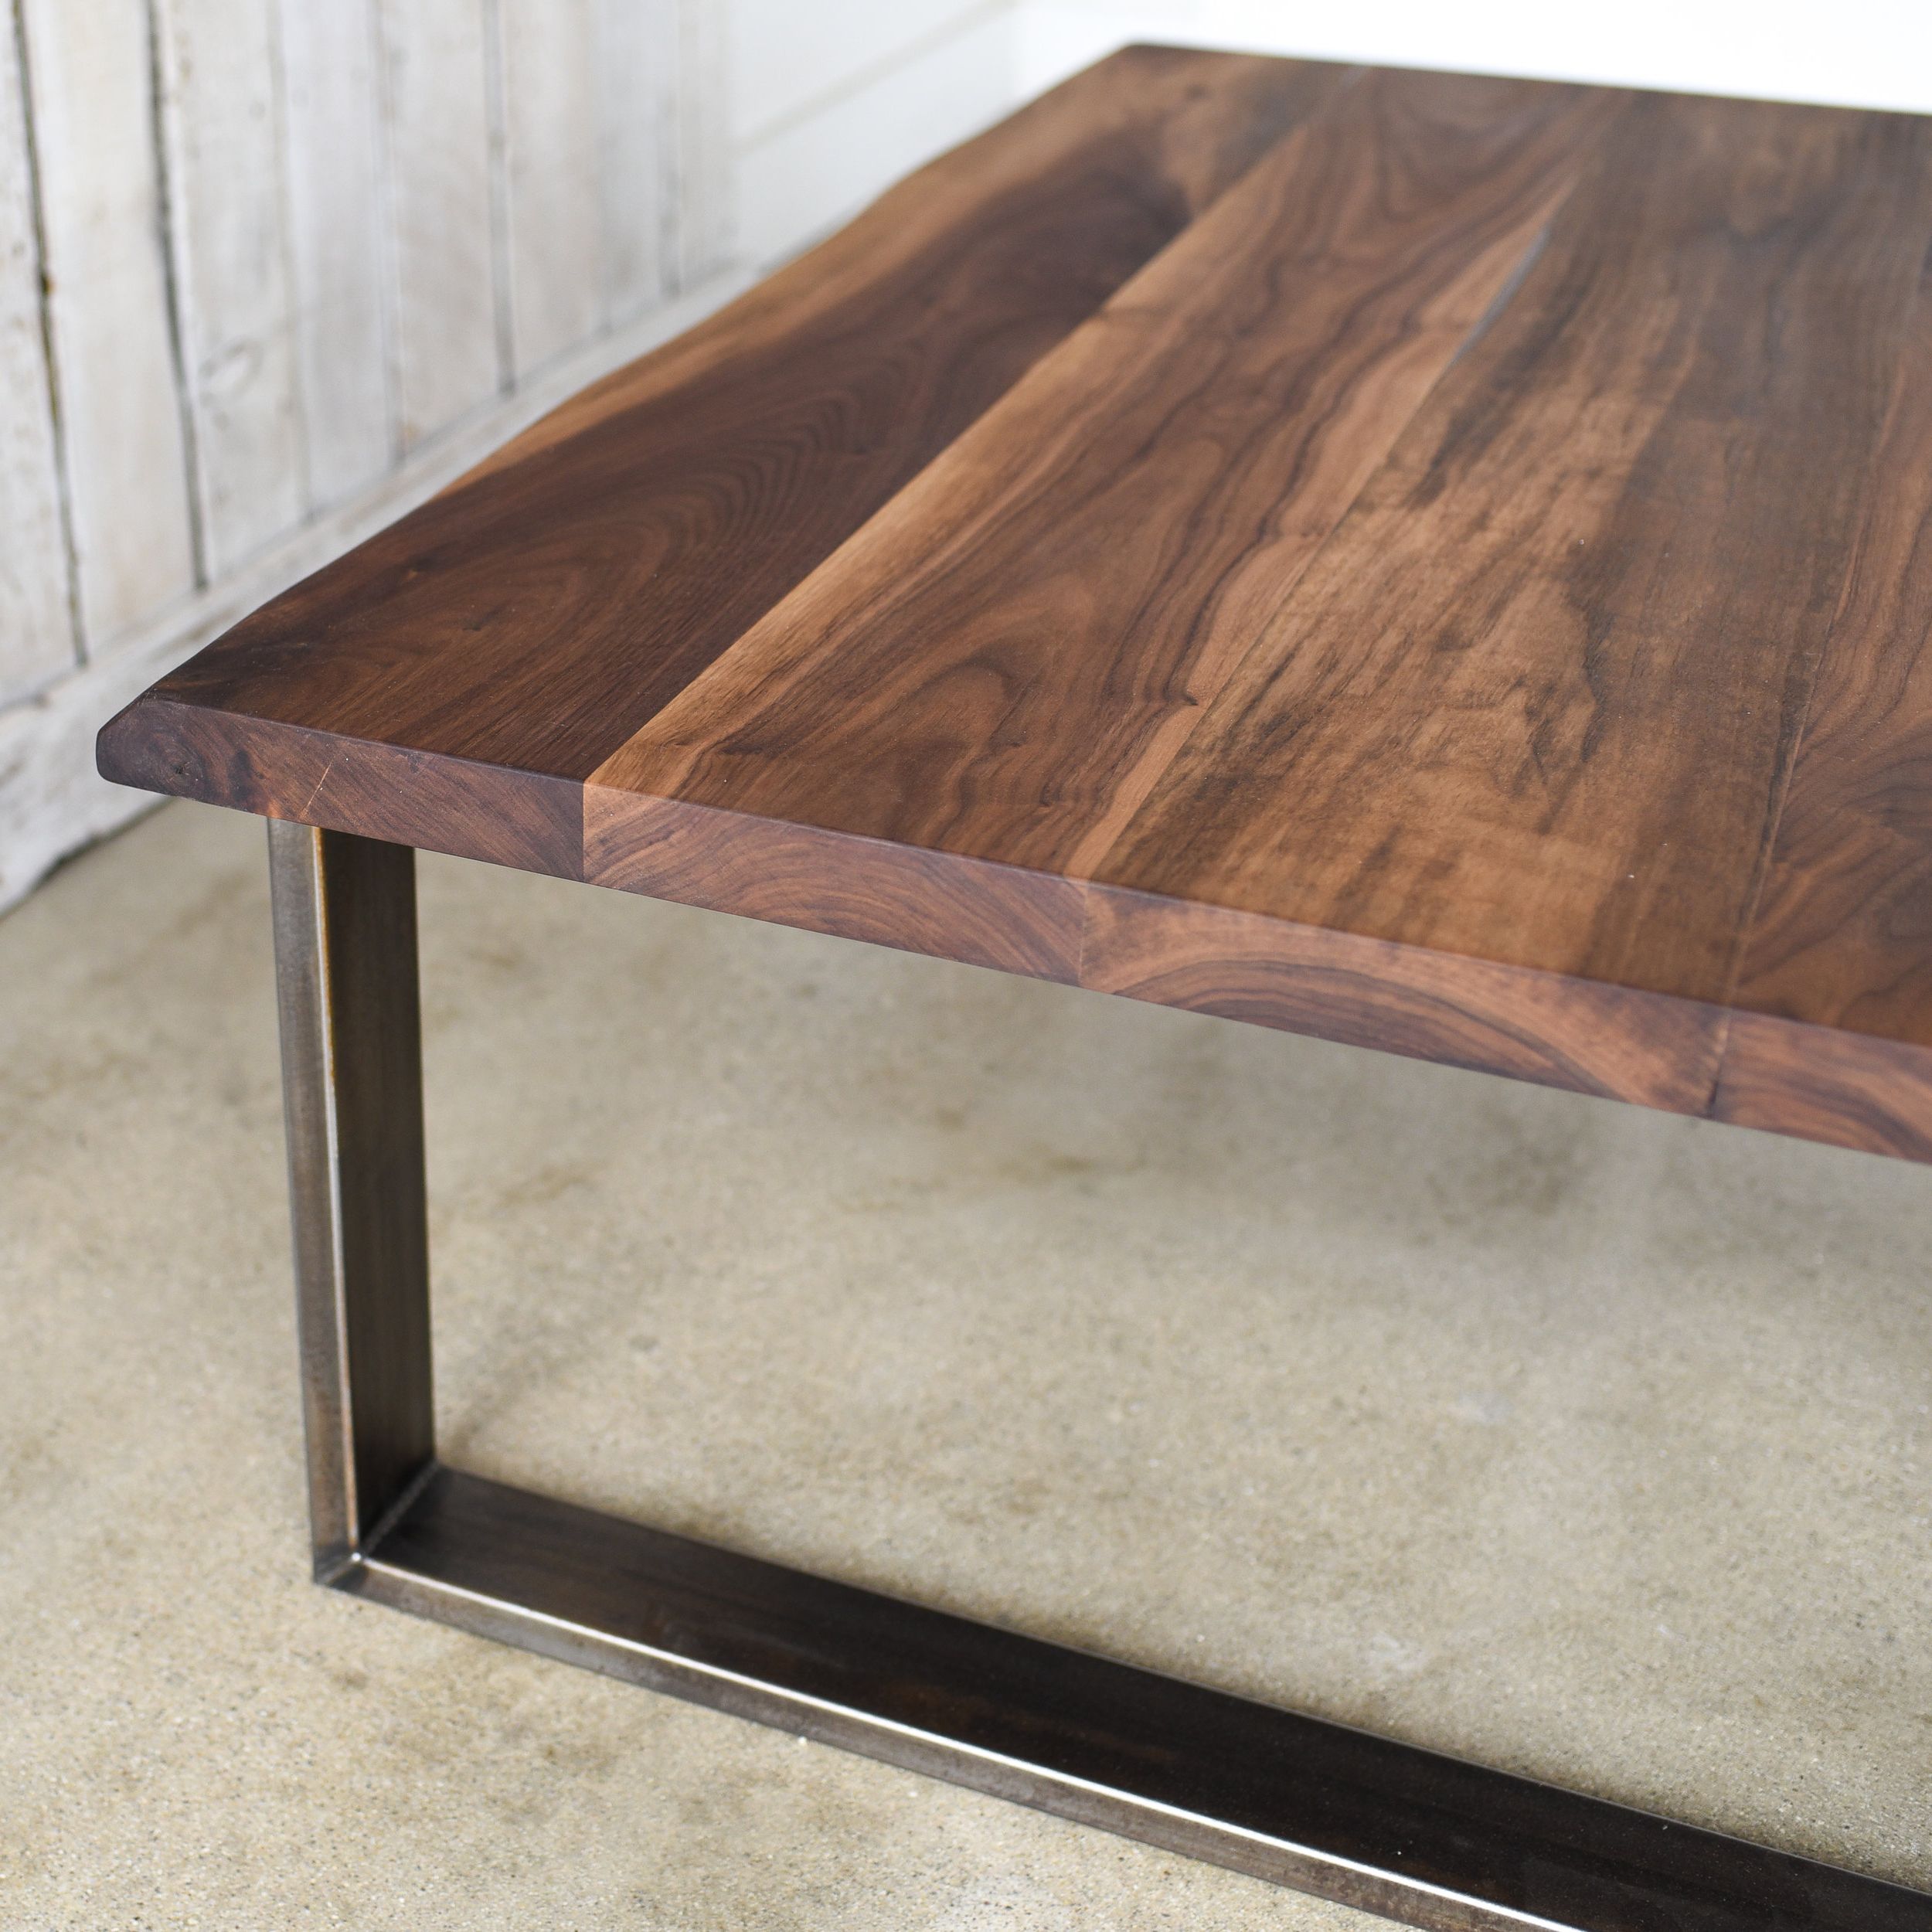 Walnut Live Edge Coffee Table / Industrial U Shaped Steel Inside Most Recently Released Hand Finished Walnut Coffee Tables (View 2 of 20)